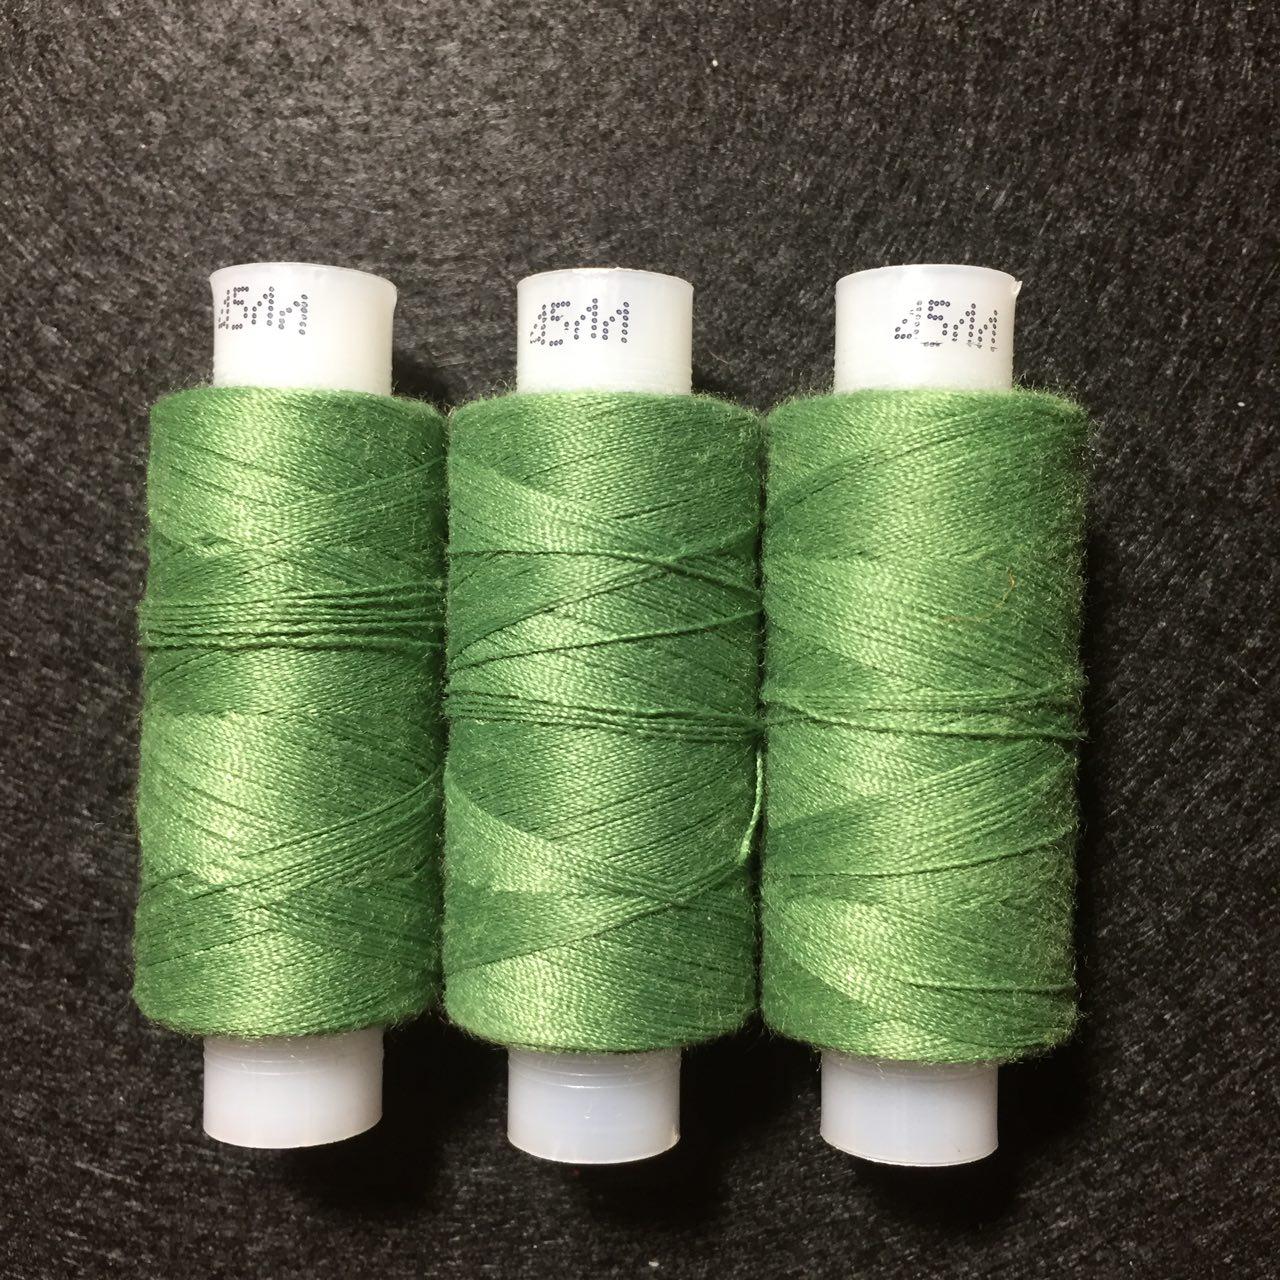 Threads for hand sewing